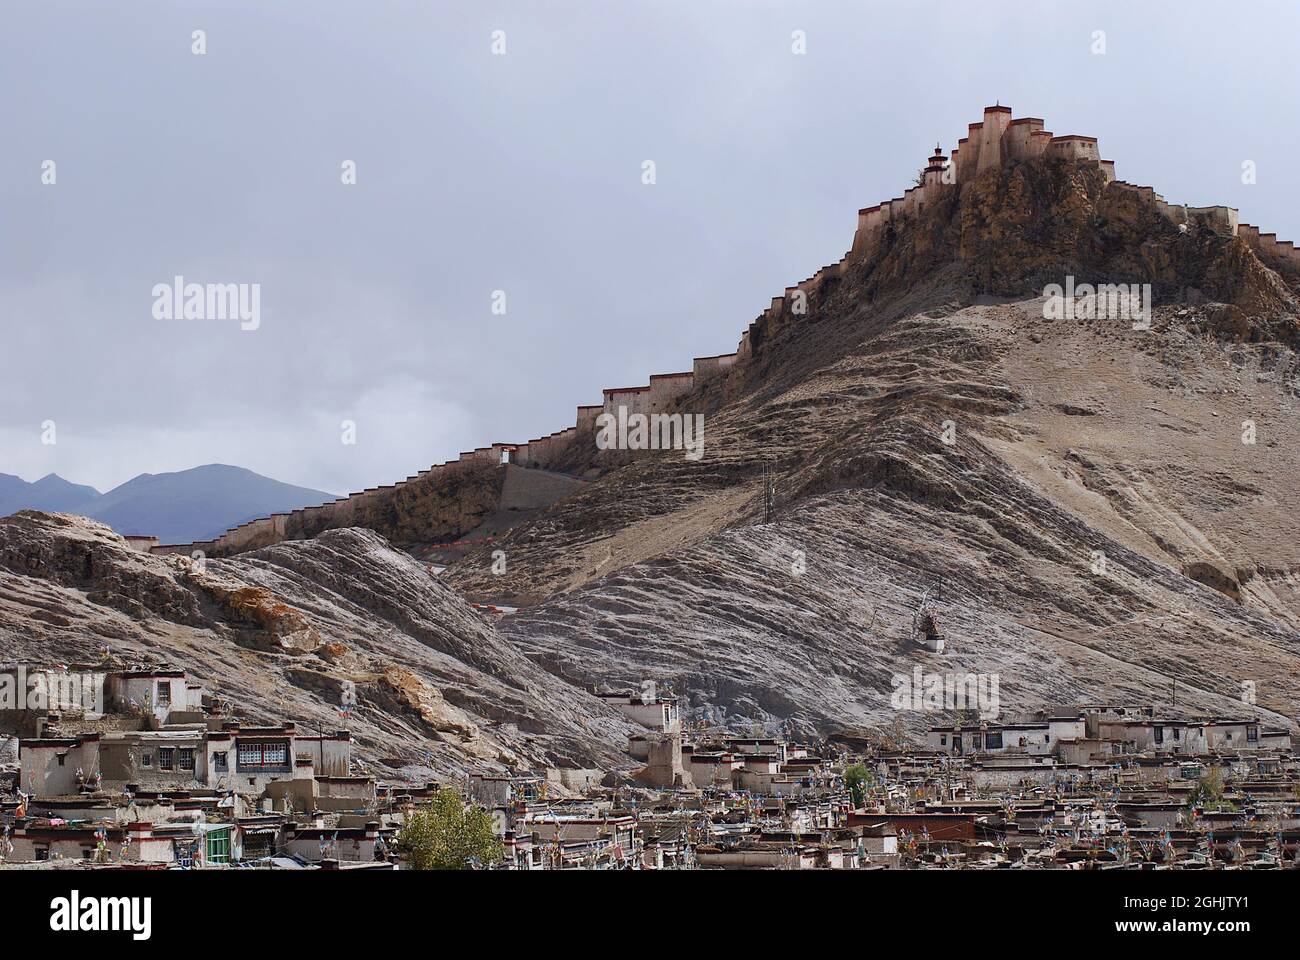 View of Gyantse Dzong and fortress wall, with the town of Gyantse in the foreground, Shigatse Prefecture, Tibet Autonomous Region Stock Photo